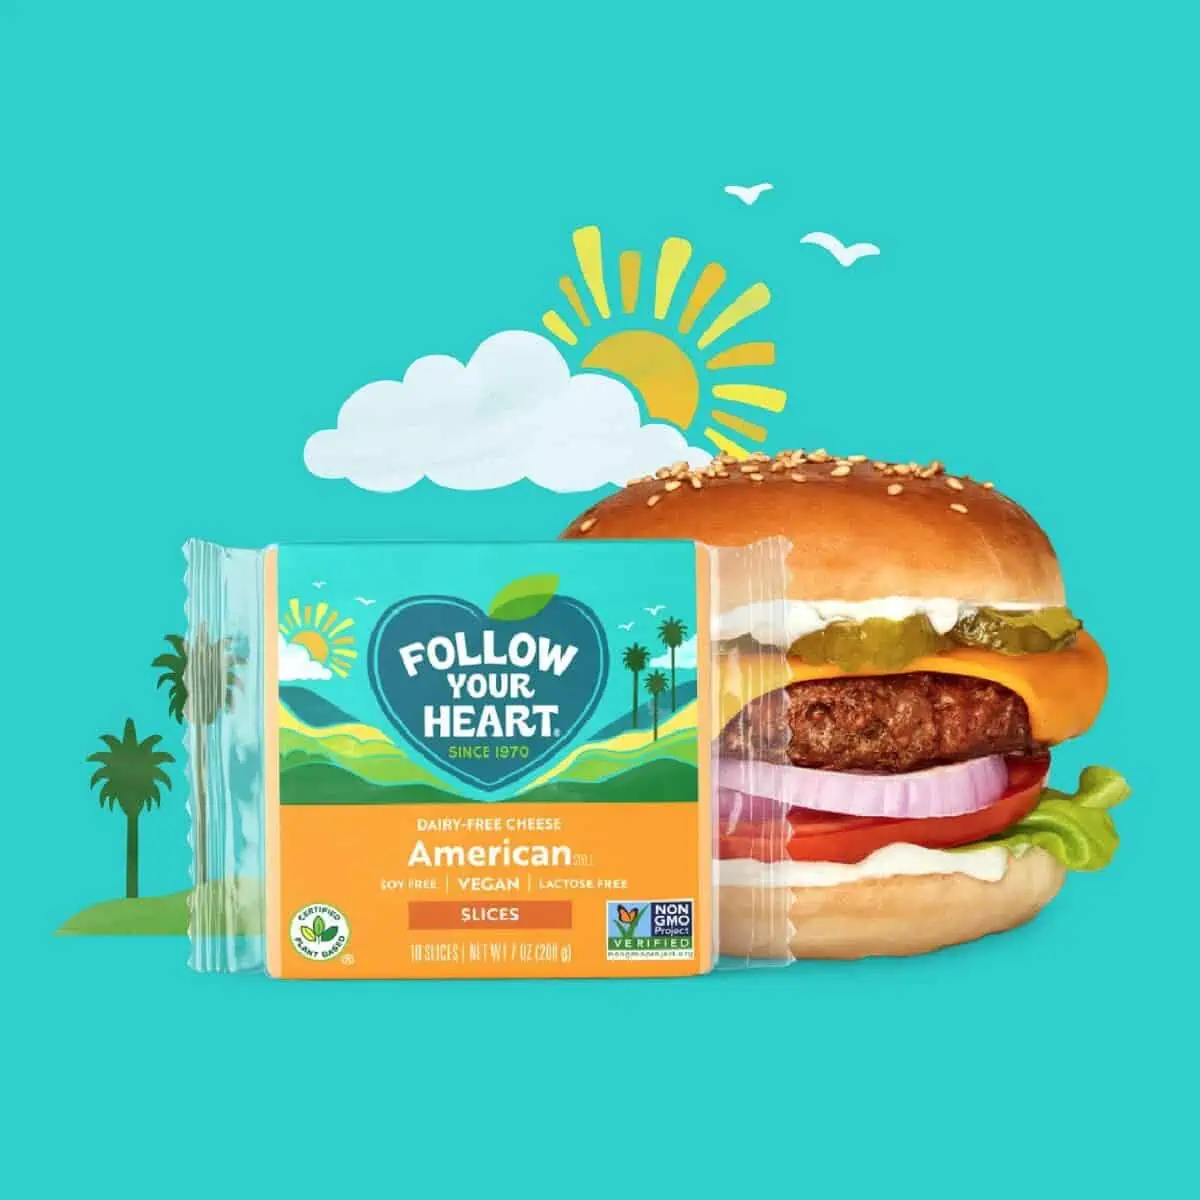 A turquoise and orange package of Follow Your Heart vegan cheese slices next to a loaded veggie burger against a turquoise background with drawn sun, clouds and trees. 